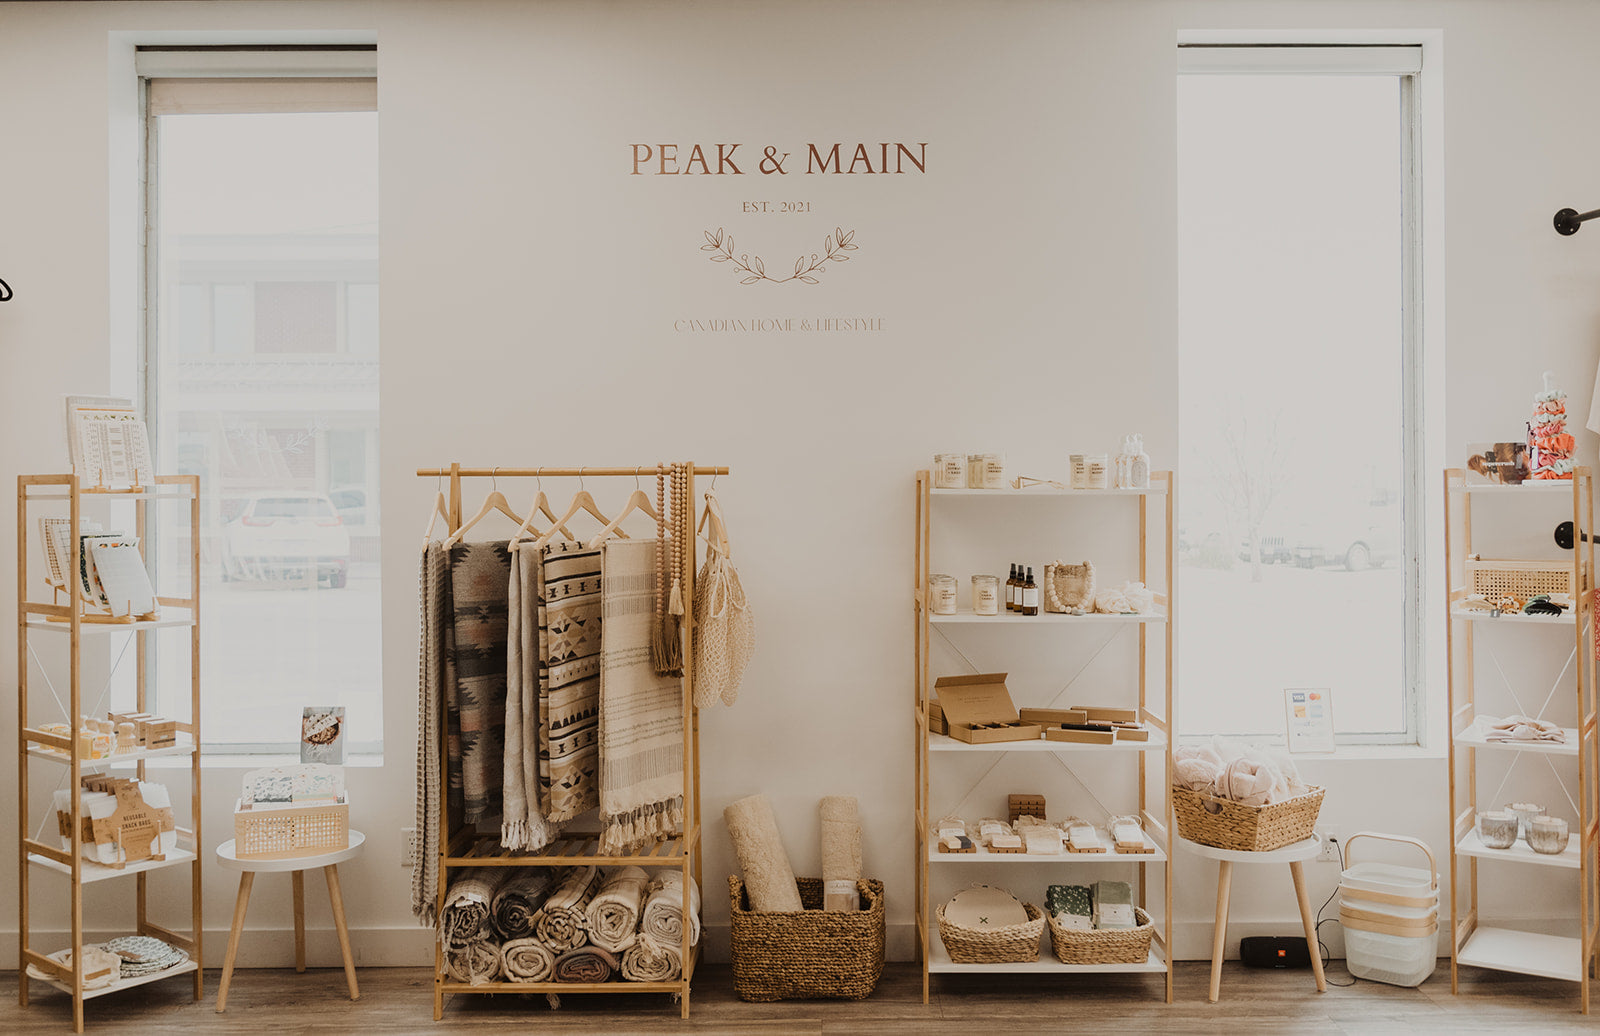 peak and main store display showcasing blankets and accessories on shelving against a white wall